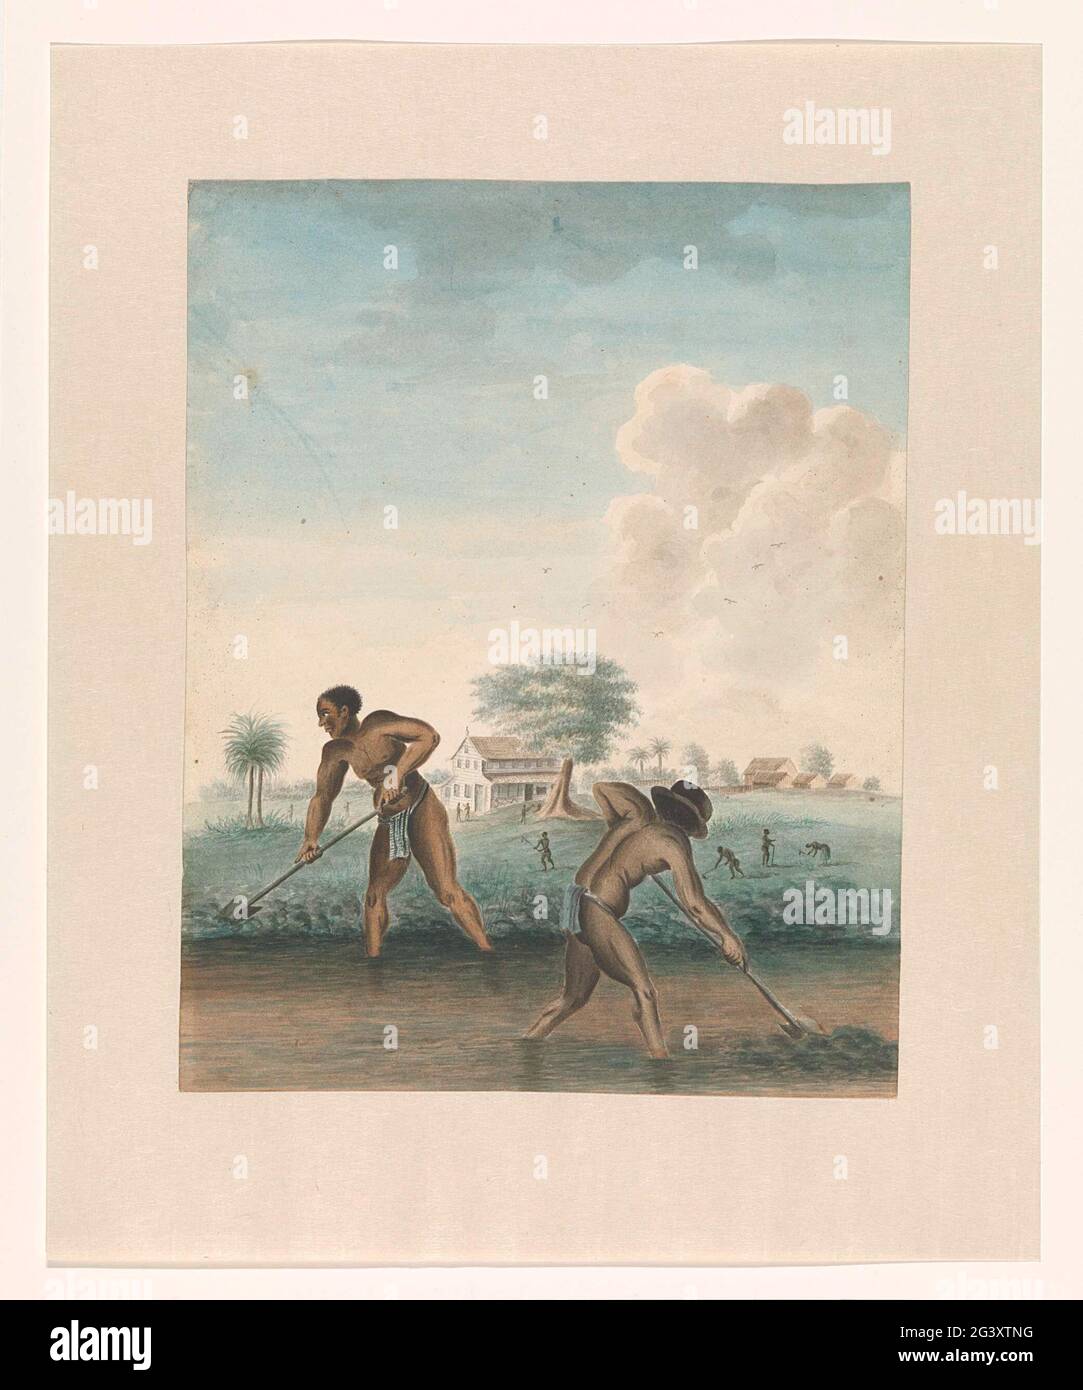 Slaves work on land. Two men-made men dig a trens (drainage channel) on a Surinamese plantation, in a planter house and a field where even more slaves work. Stock Photo